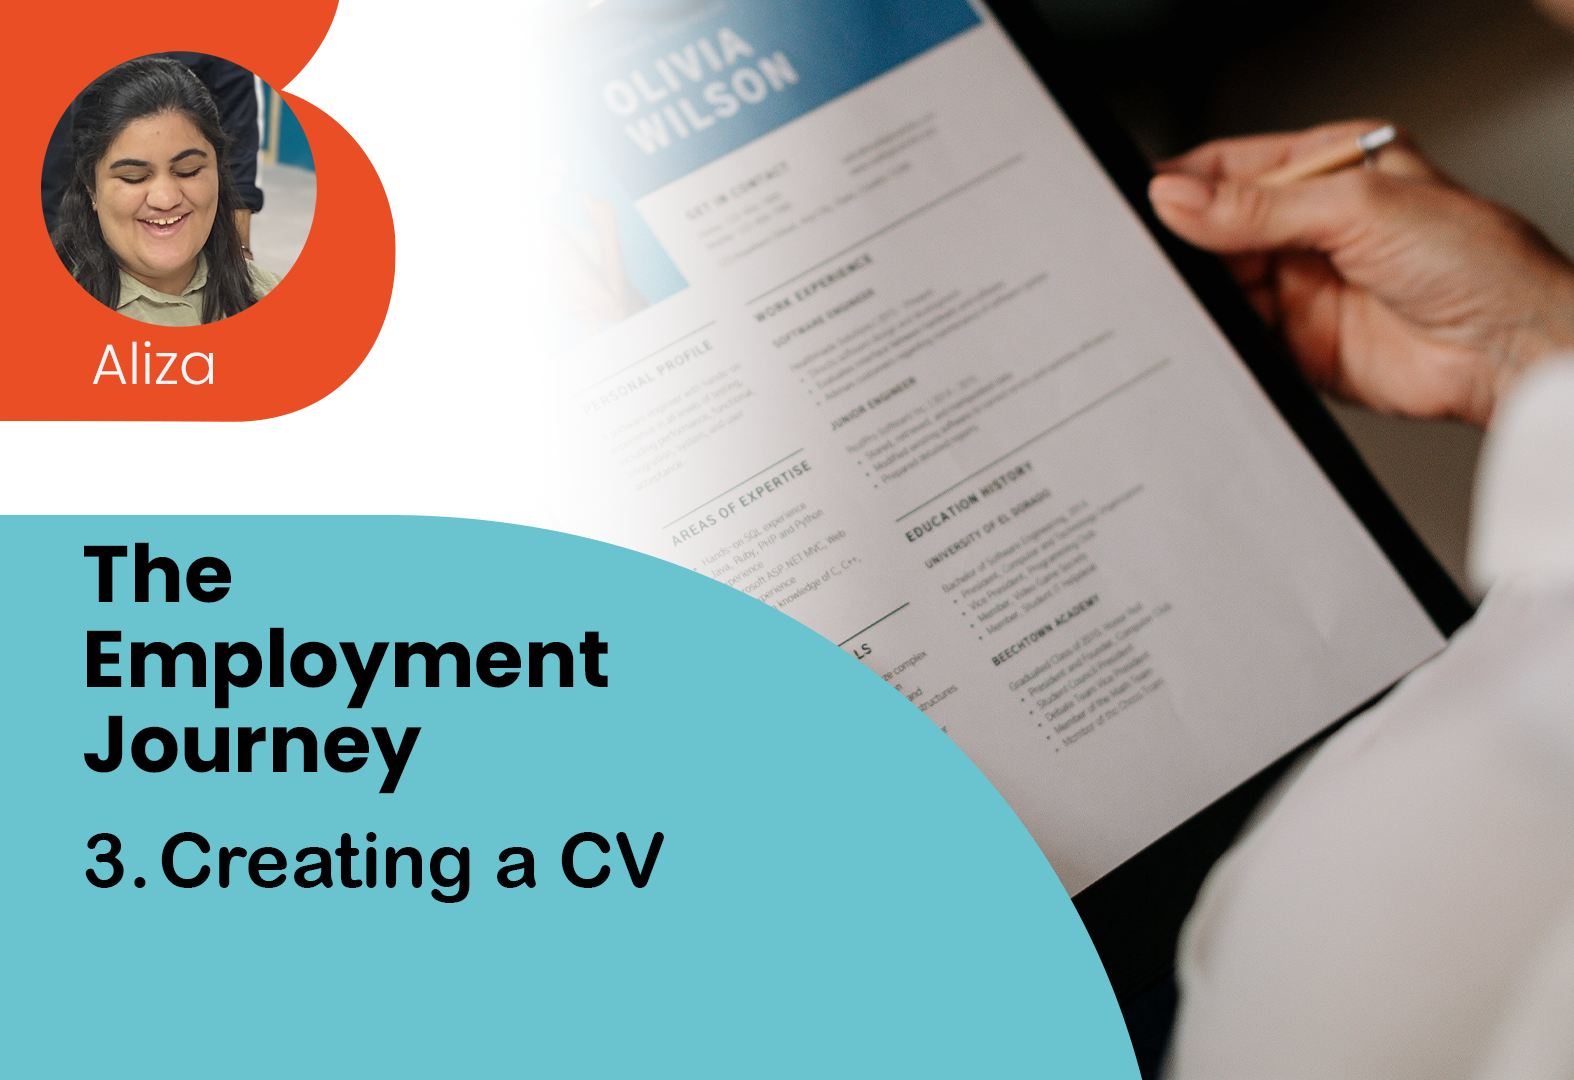 An inset portrait photo of Aliza over a person holding a CV. Below her is the title: "The Employment Journey – 3: Creating a CV"